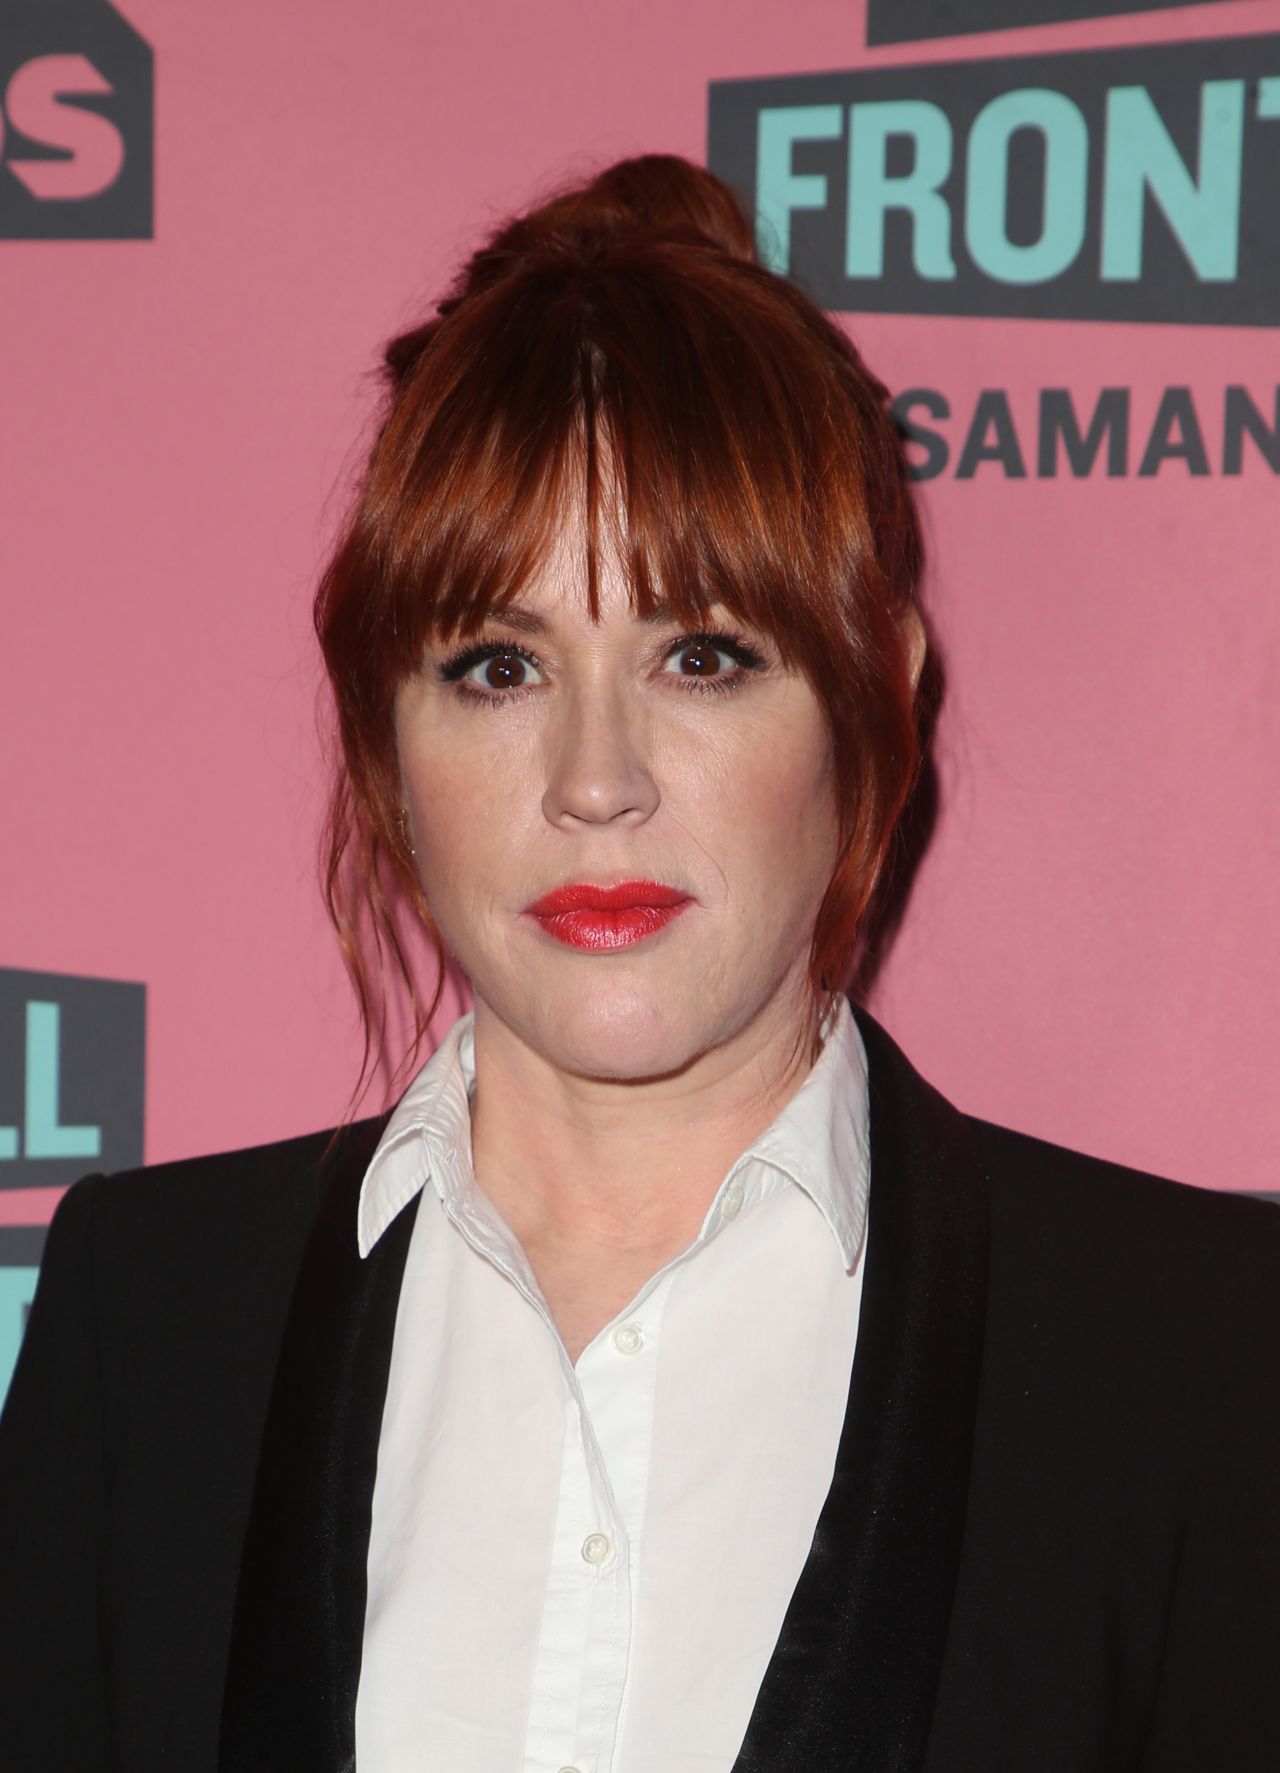 molly-ringwald-full-frontal-with-samantha-bee-fyc-event-in-beverly-hills-0.jpg